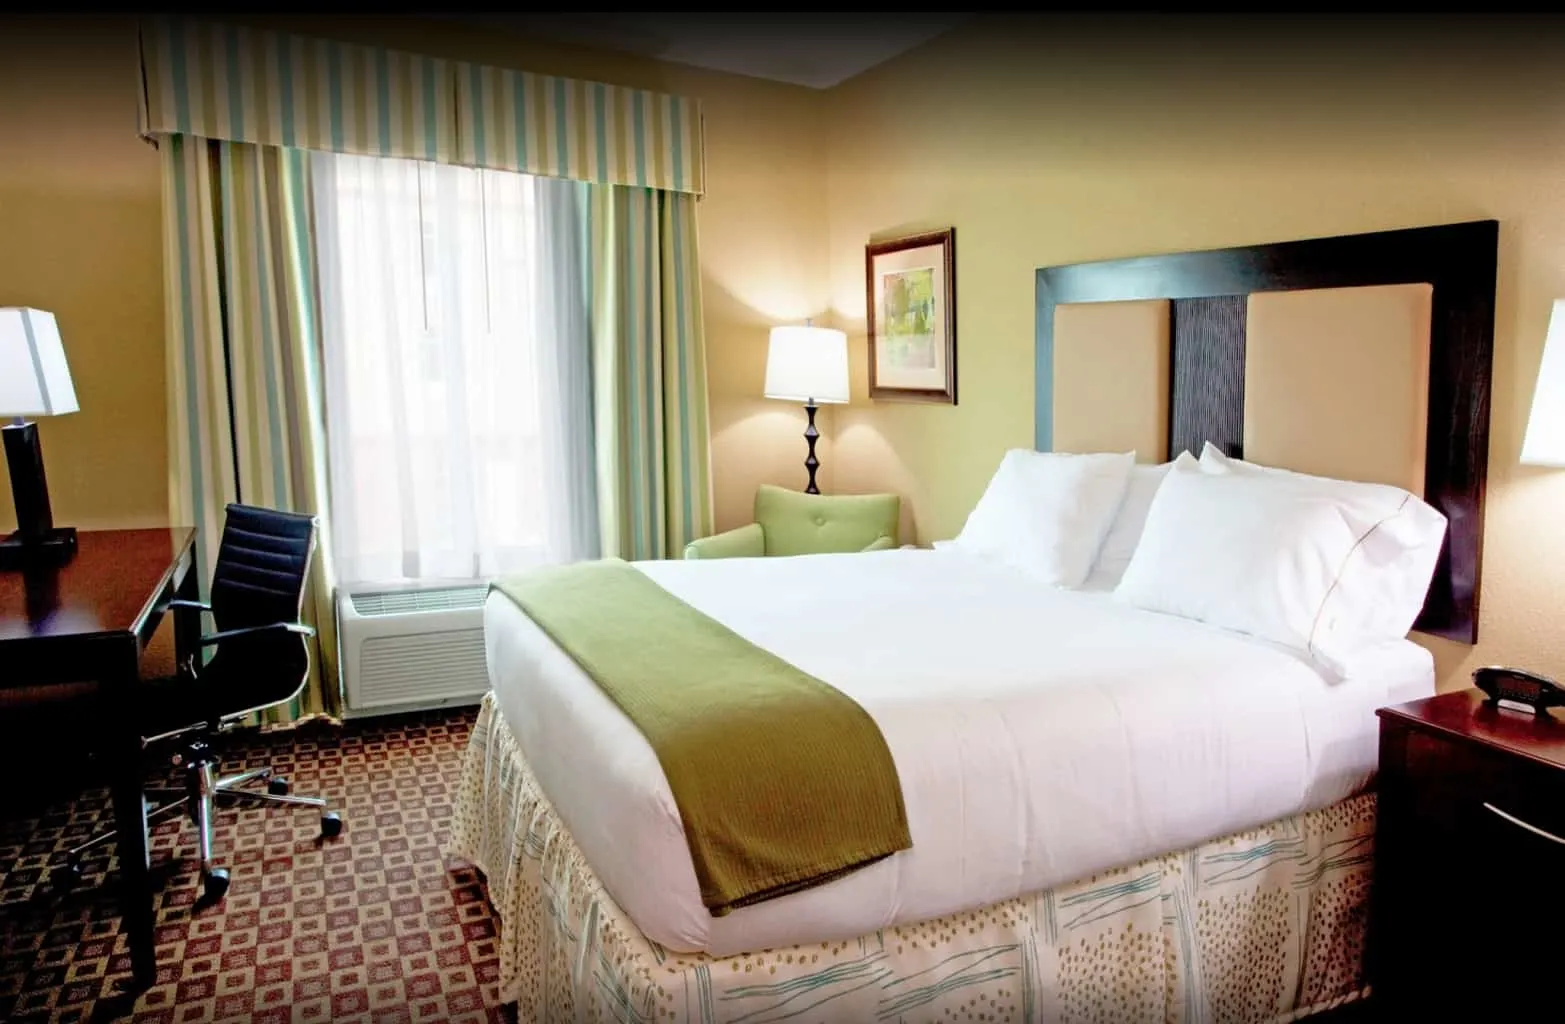 Staying at the Holiday Inn Chaffee-Jacksonville is cheaper when you buy IHG points. Travelingwellforless.com